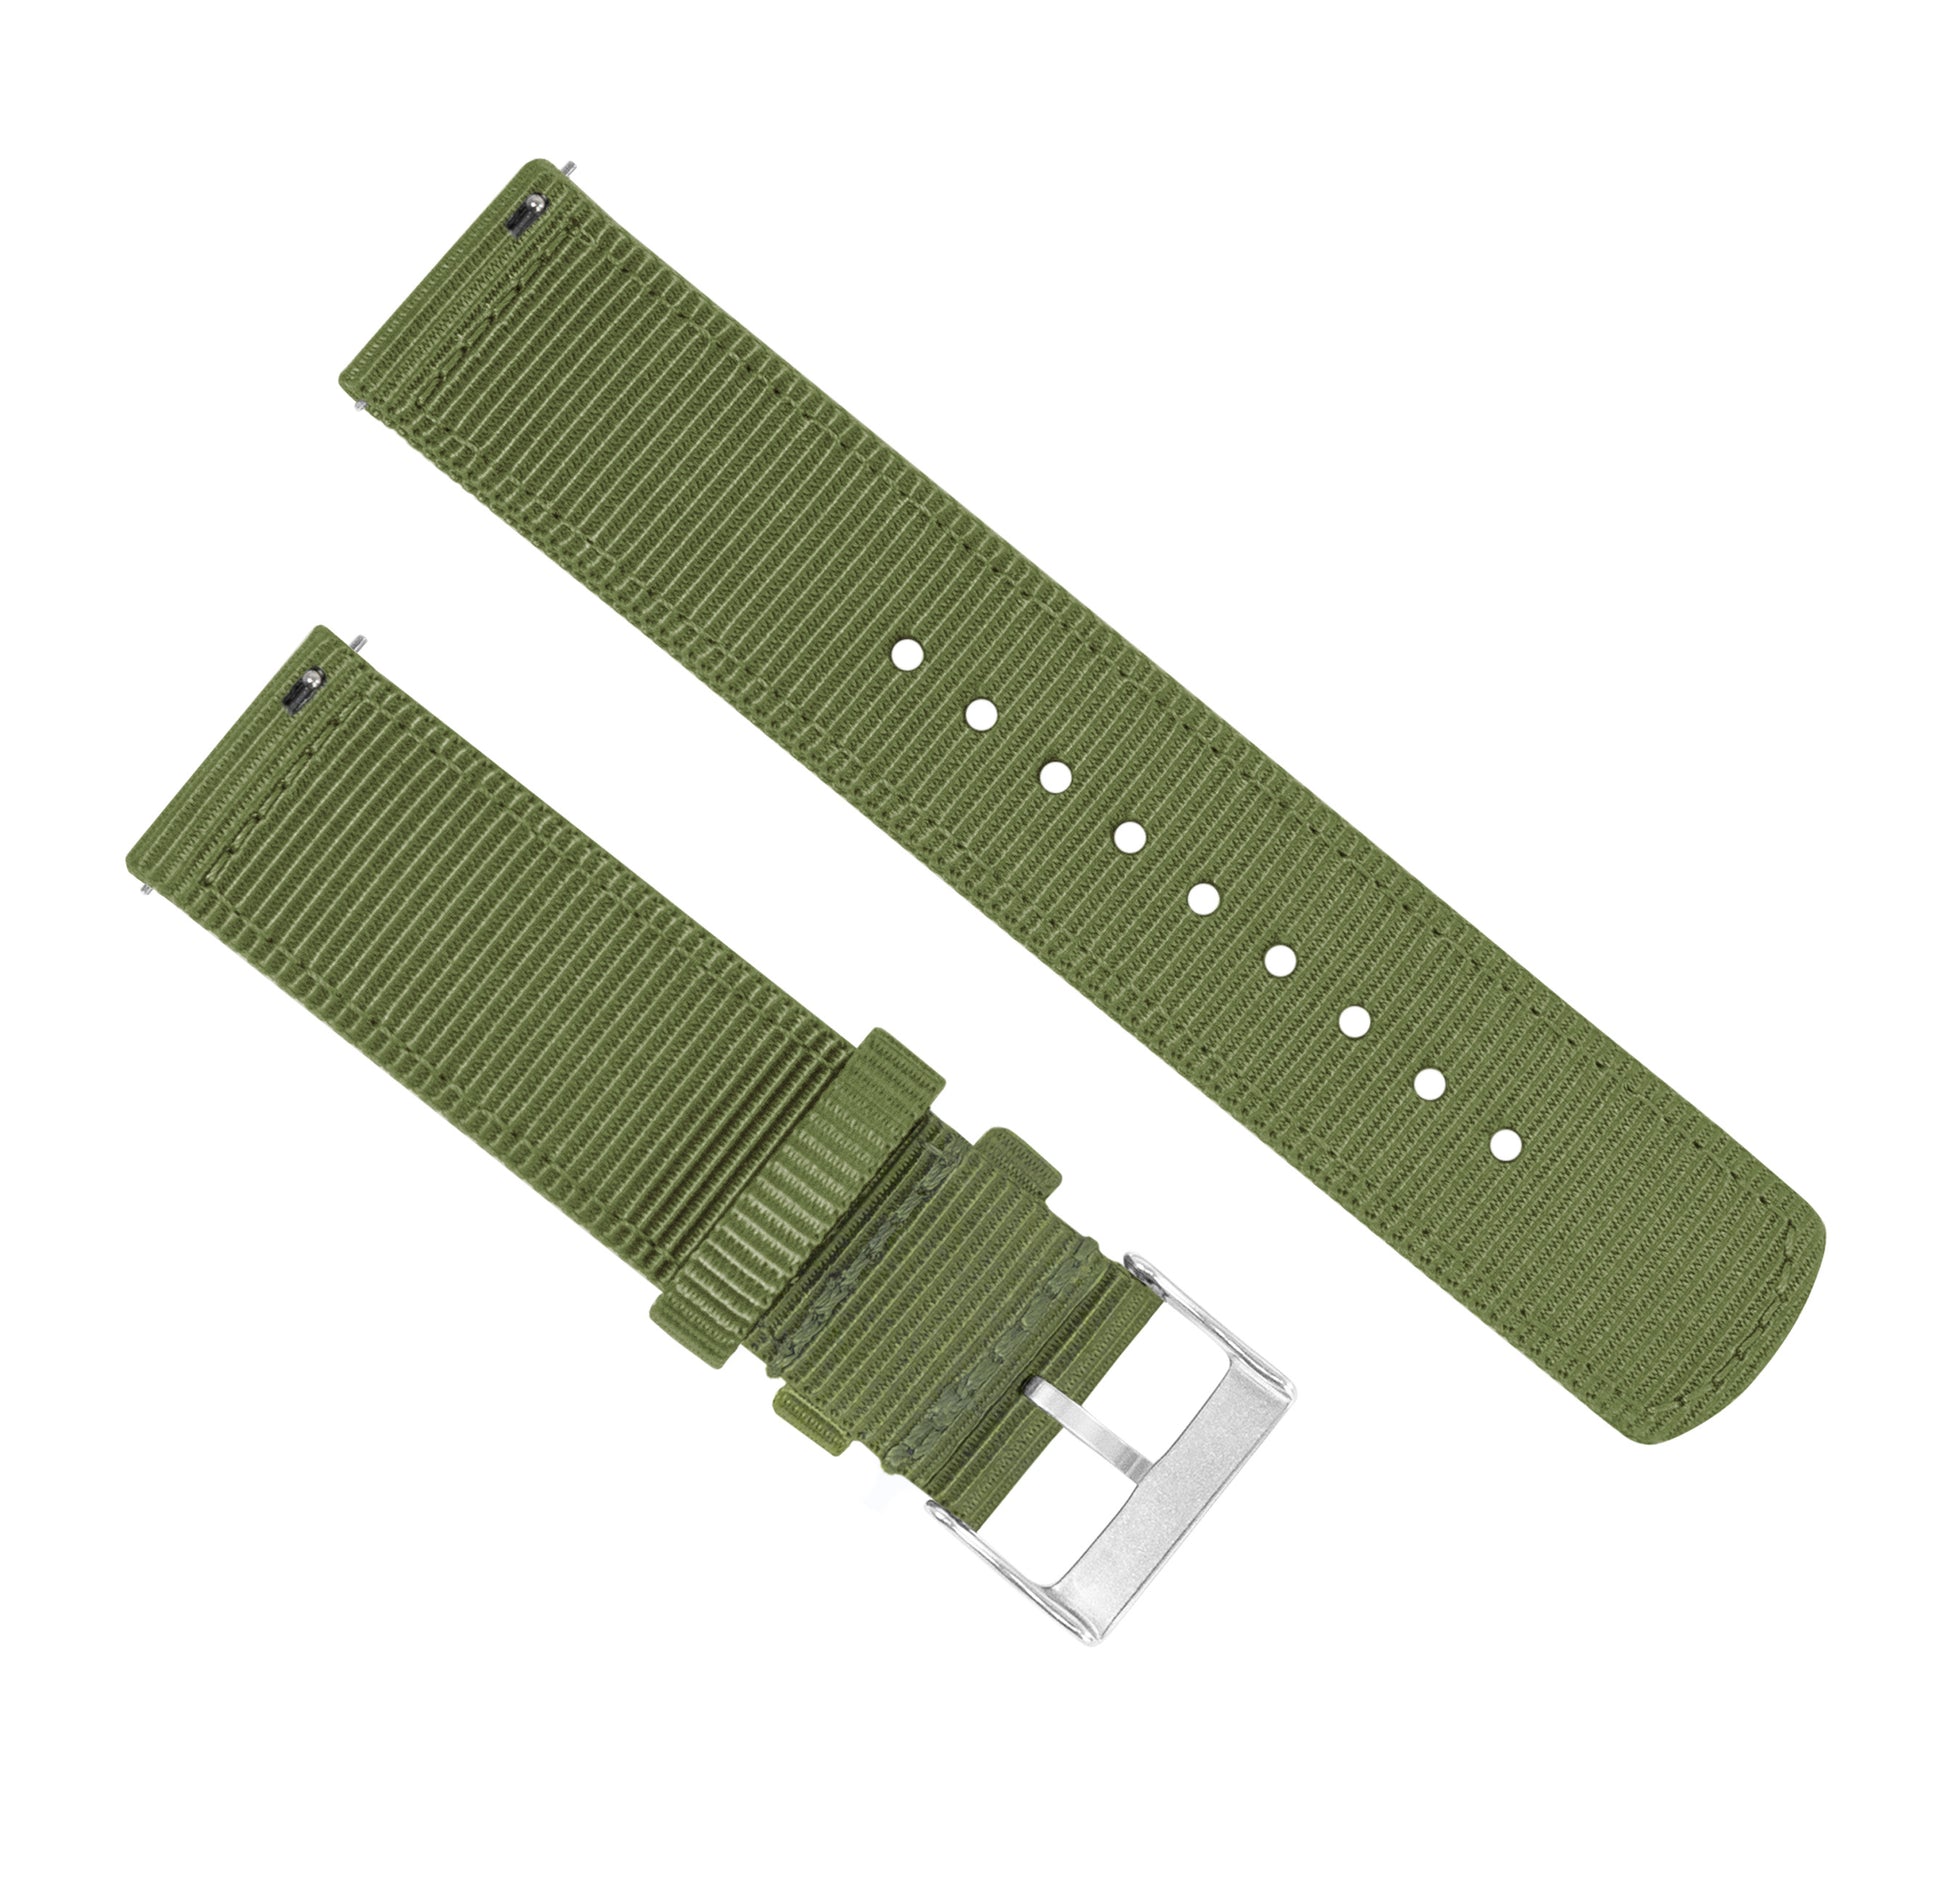 Fossil Q | Two-Piece NATO Style | Army Green - Barton Watch Bands